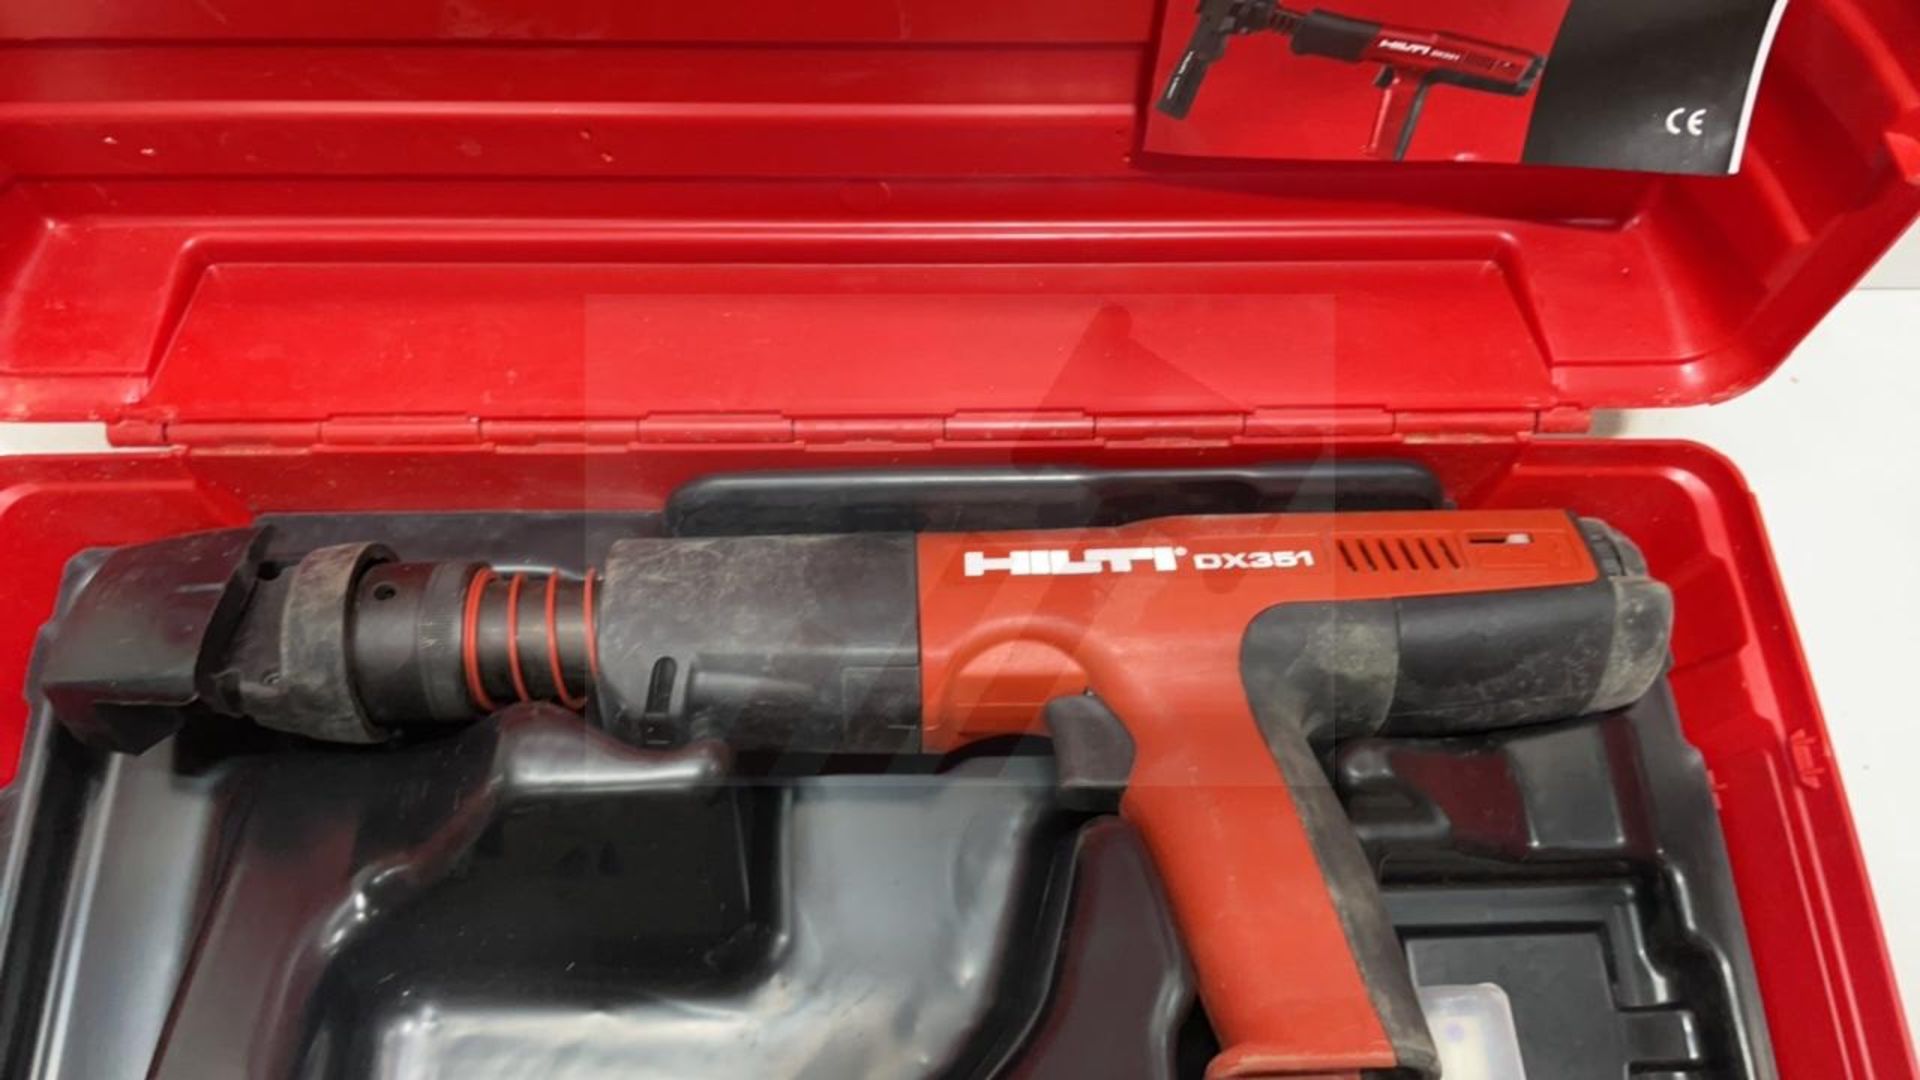 HILTI DX 351 POWER-ACTUATED TOOL - Image 2 of 7